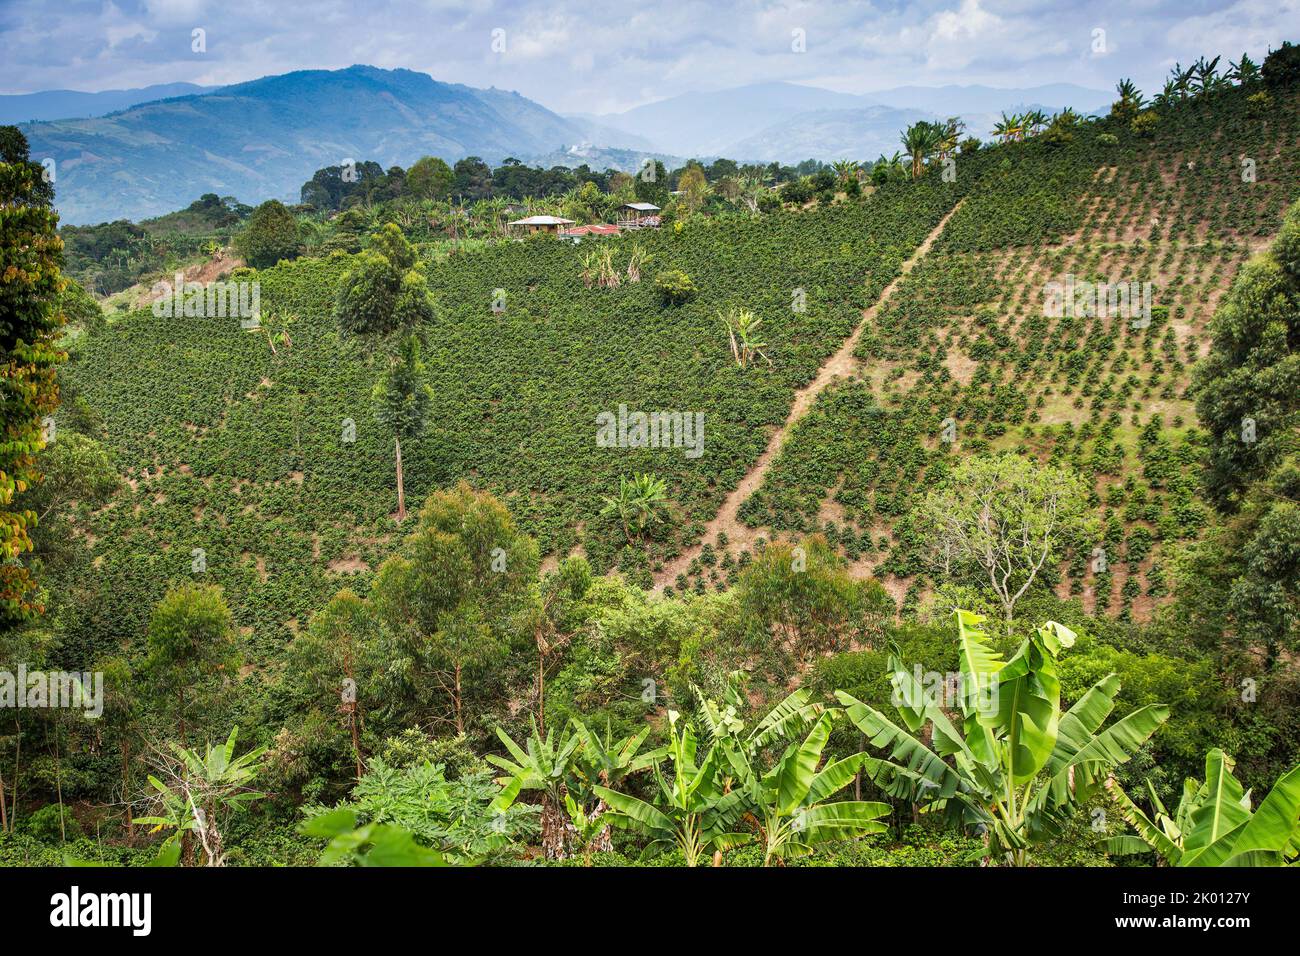 Colombia, Huila department, San Agustin region, one of the many coffee plantations on the hills around. Stock Photo